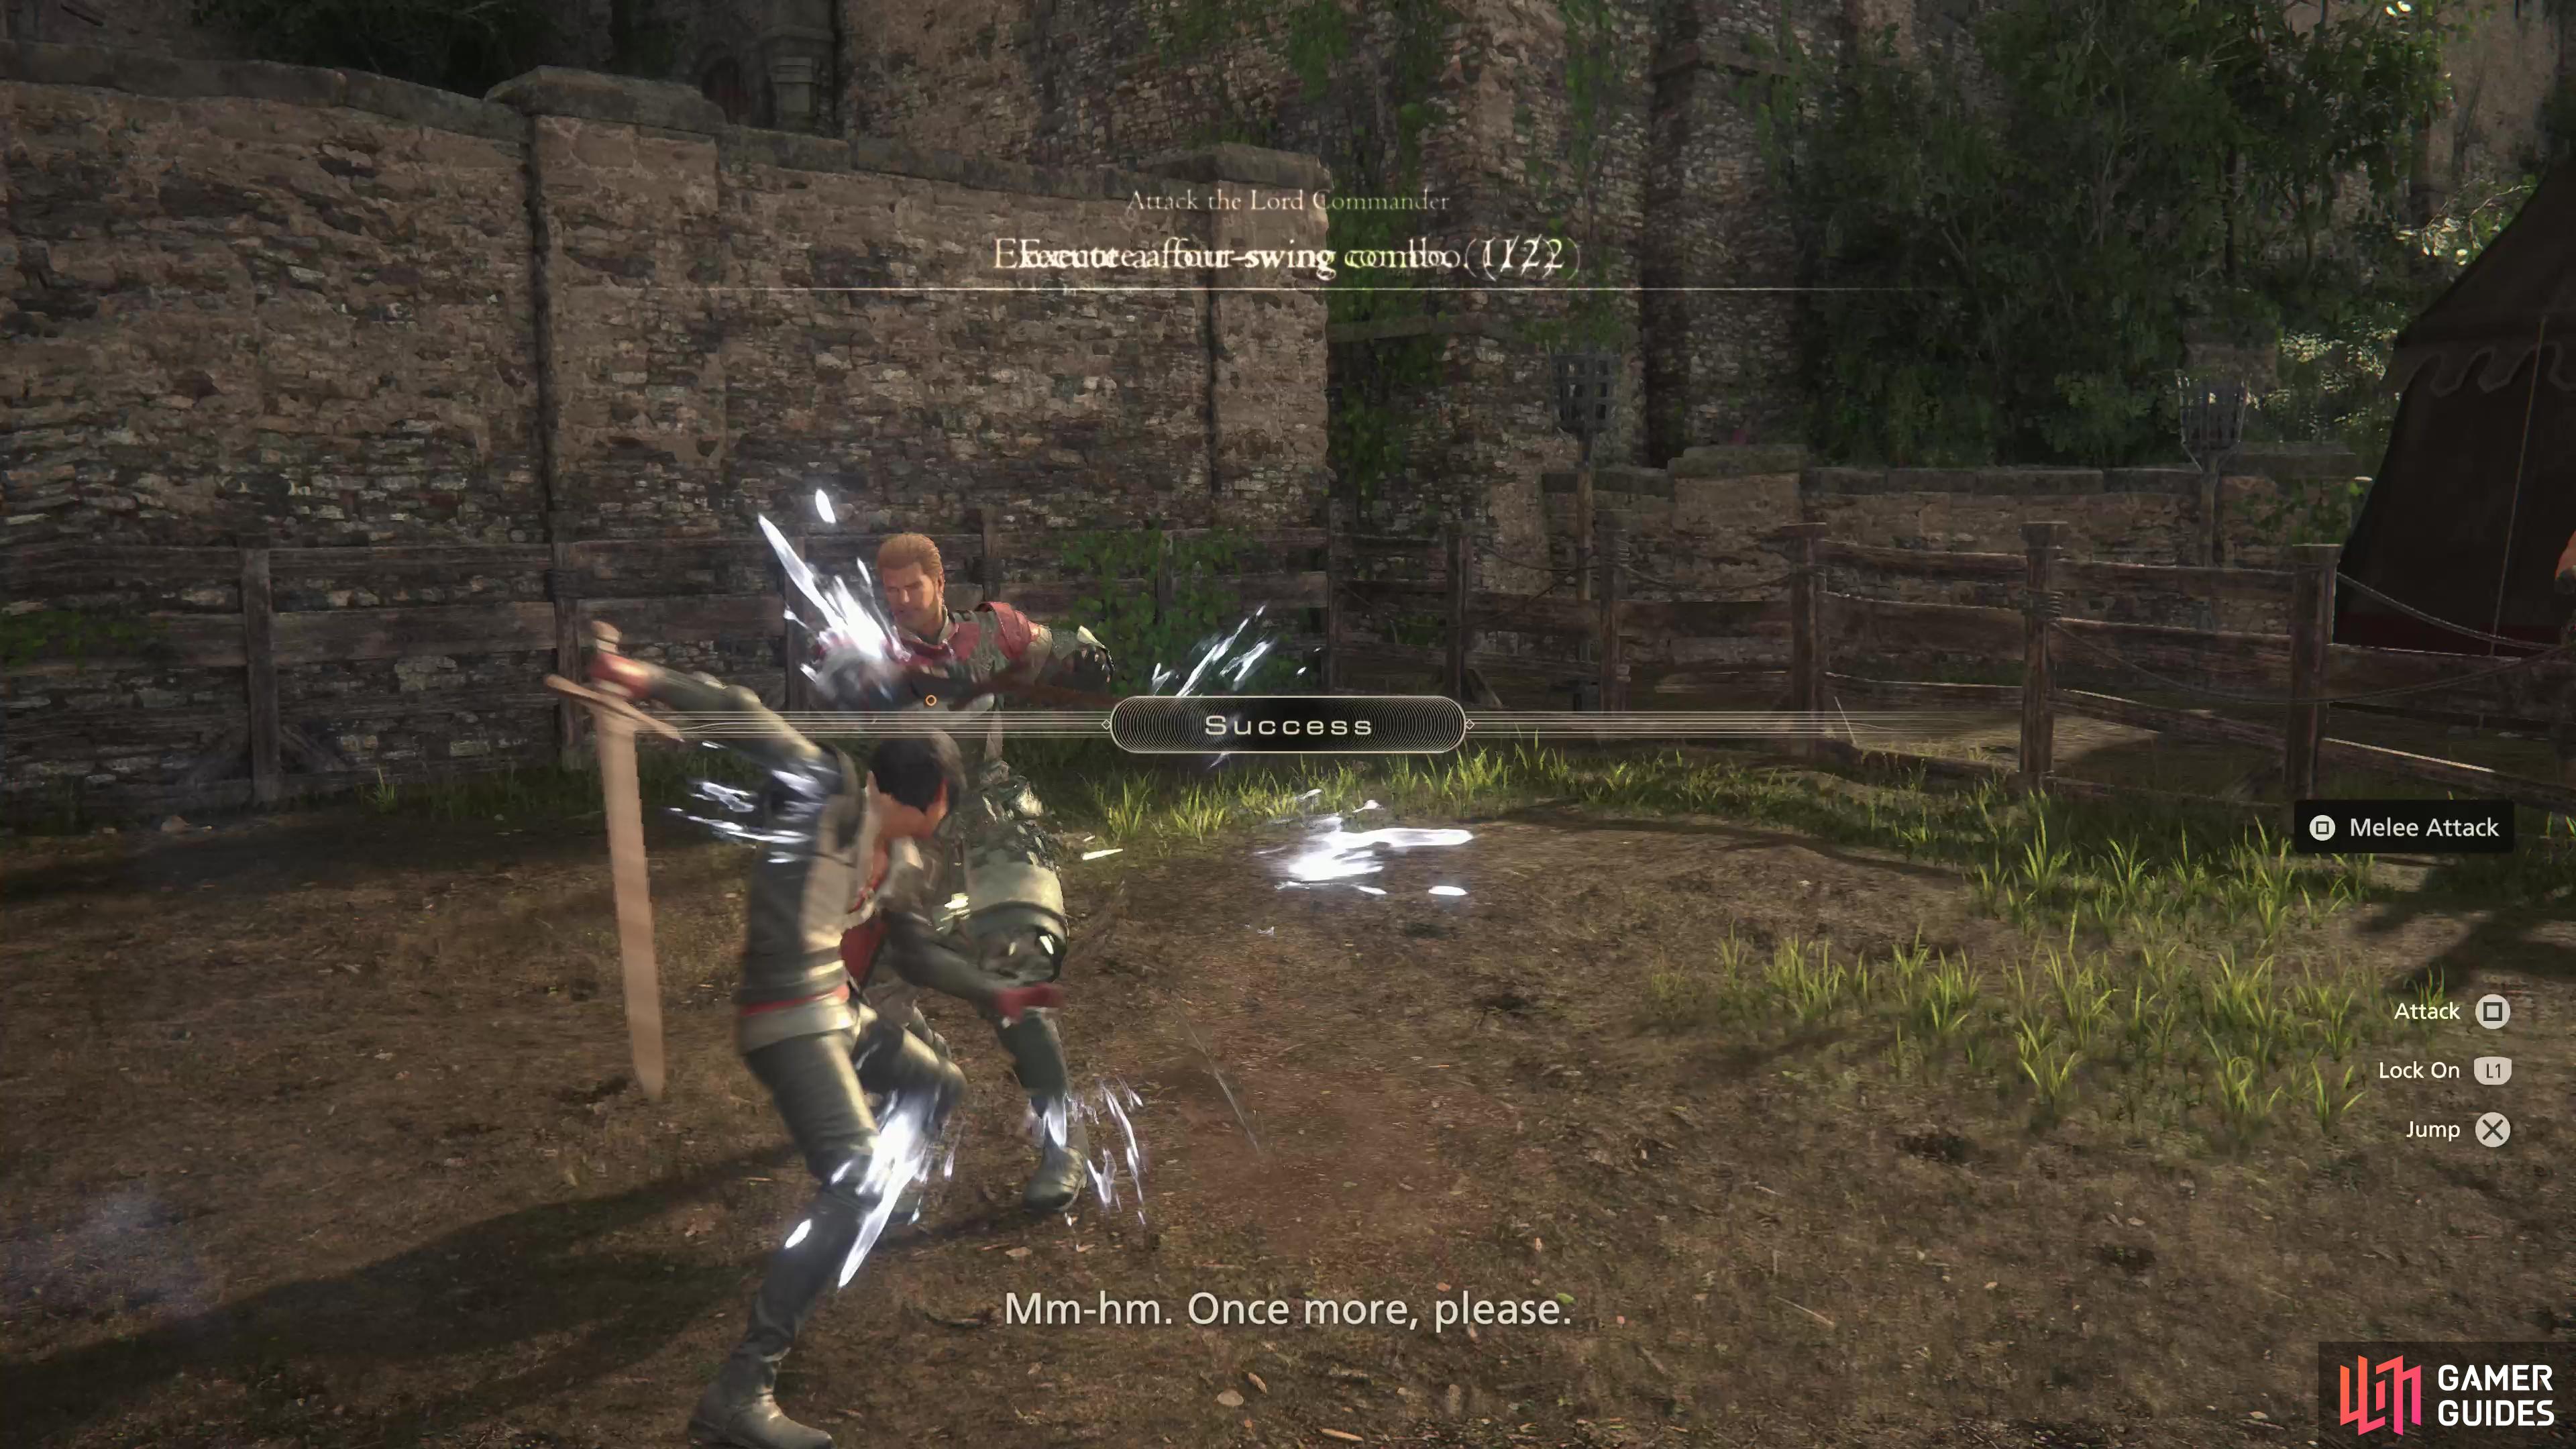 Start out the combat tutorial by performing two four-hit melee combos.